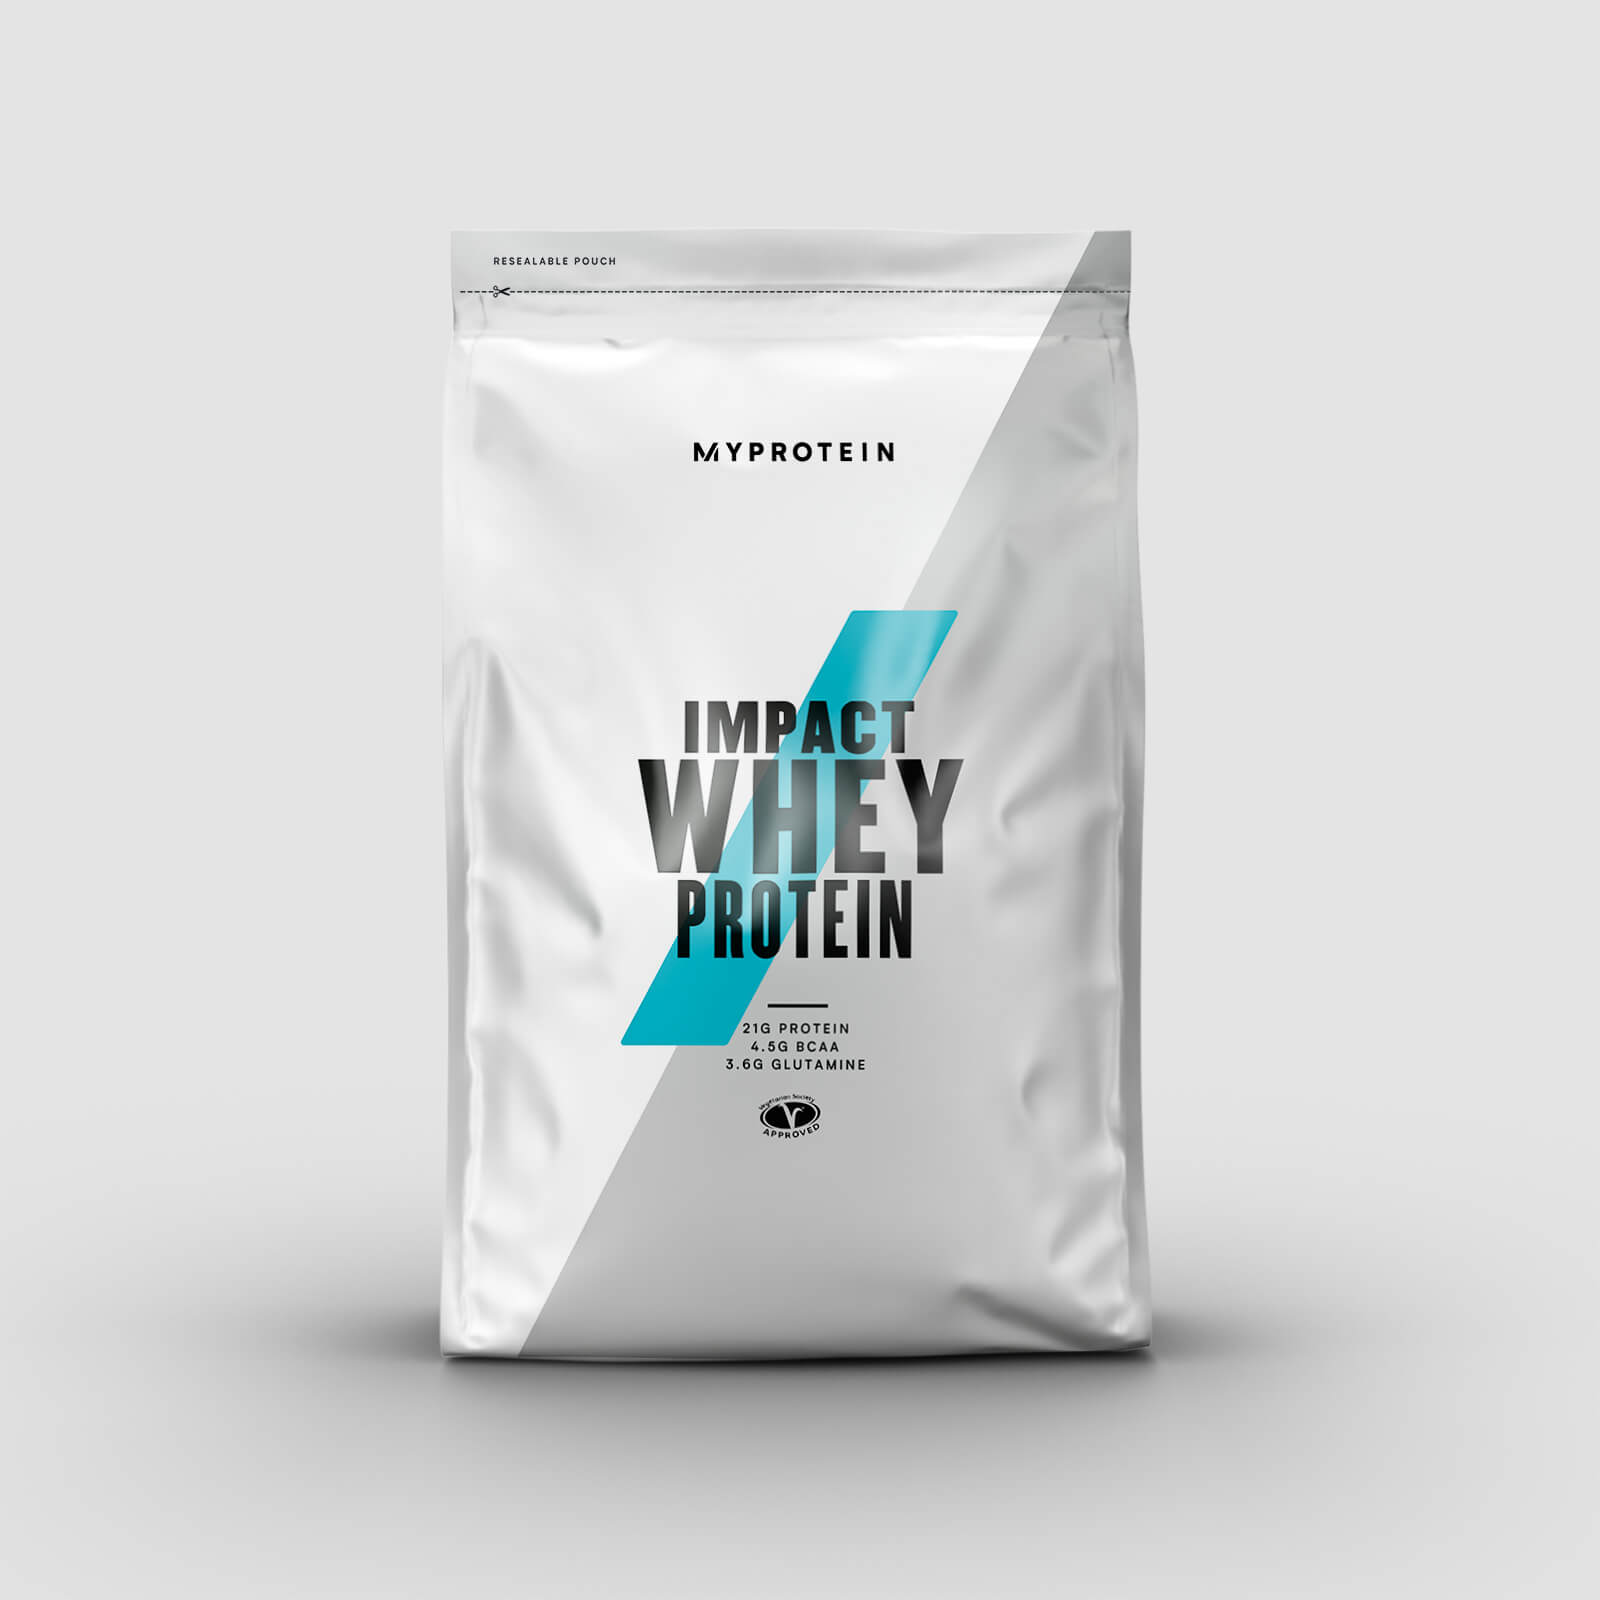 Myprotein Vassleprotein - Impact Whey Protein - 2.5kg - Natural Banana - New and Improved